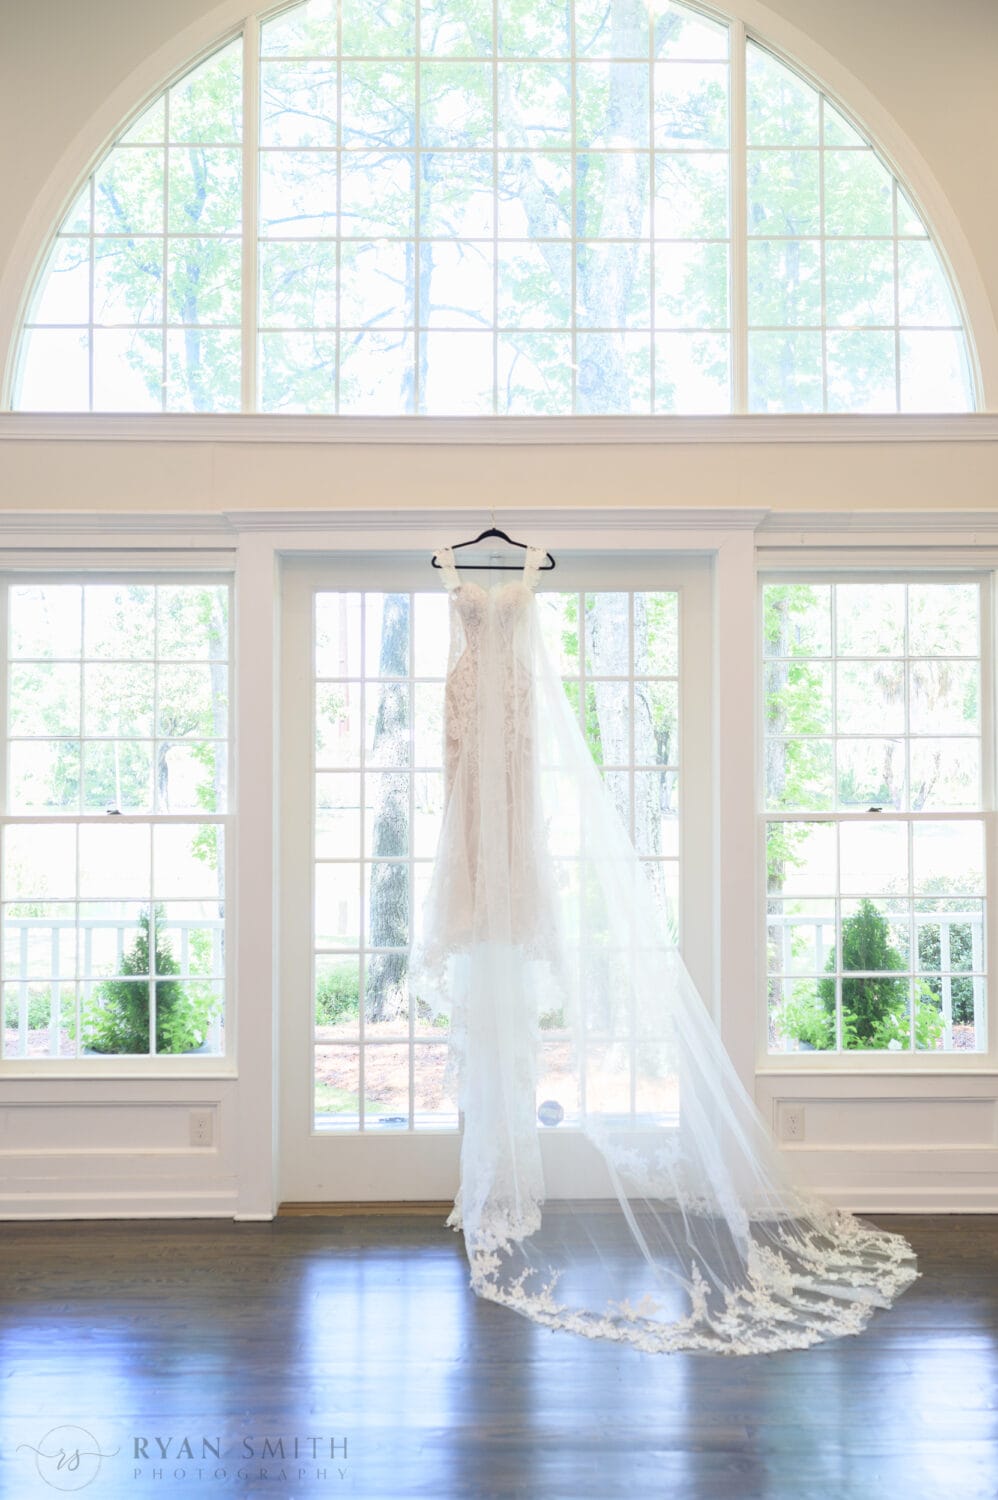 Bride's dress and veil hanging in the window - The Village House at Litchfield